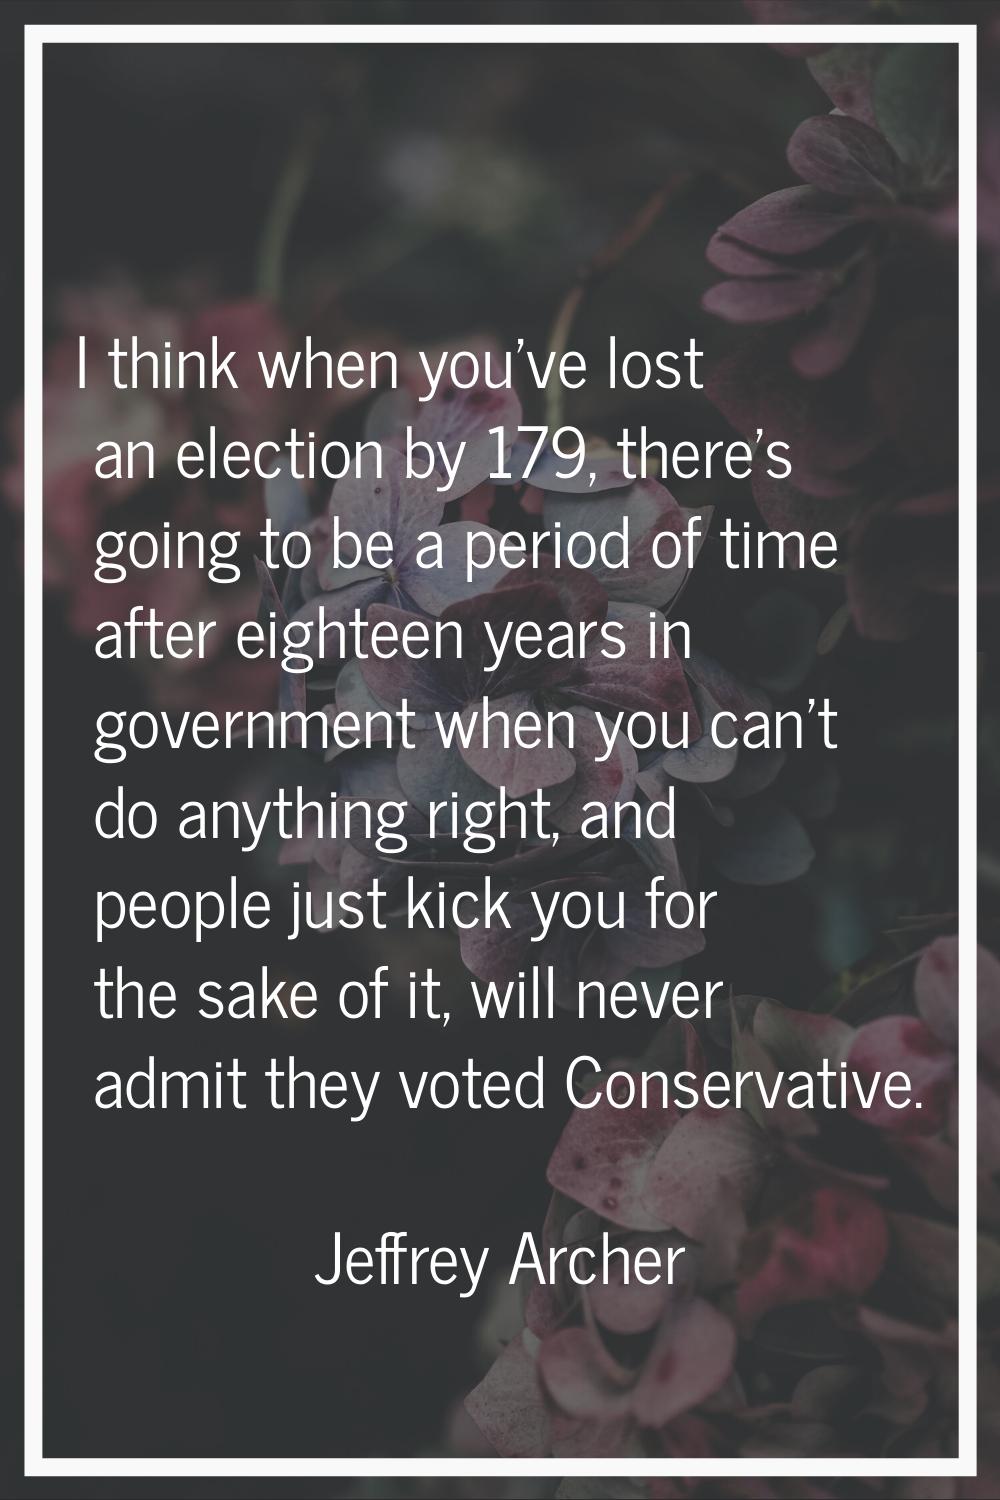 I think when you've lost an election by 179, there's going to be a period of time after eighteen ye